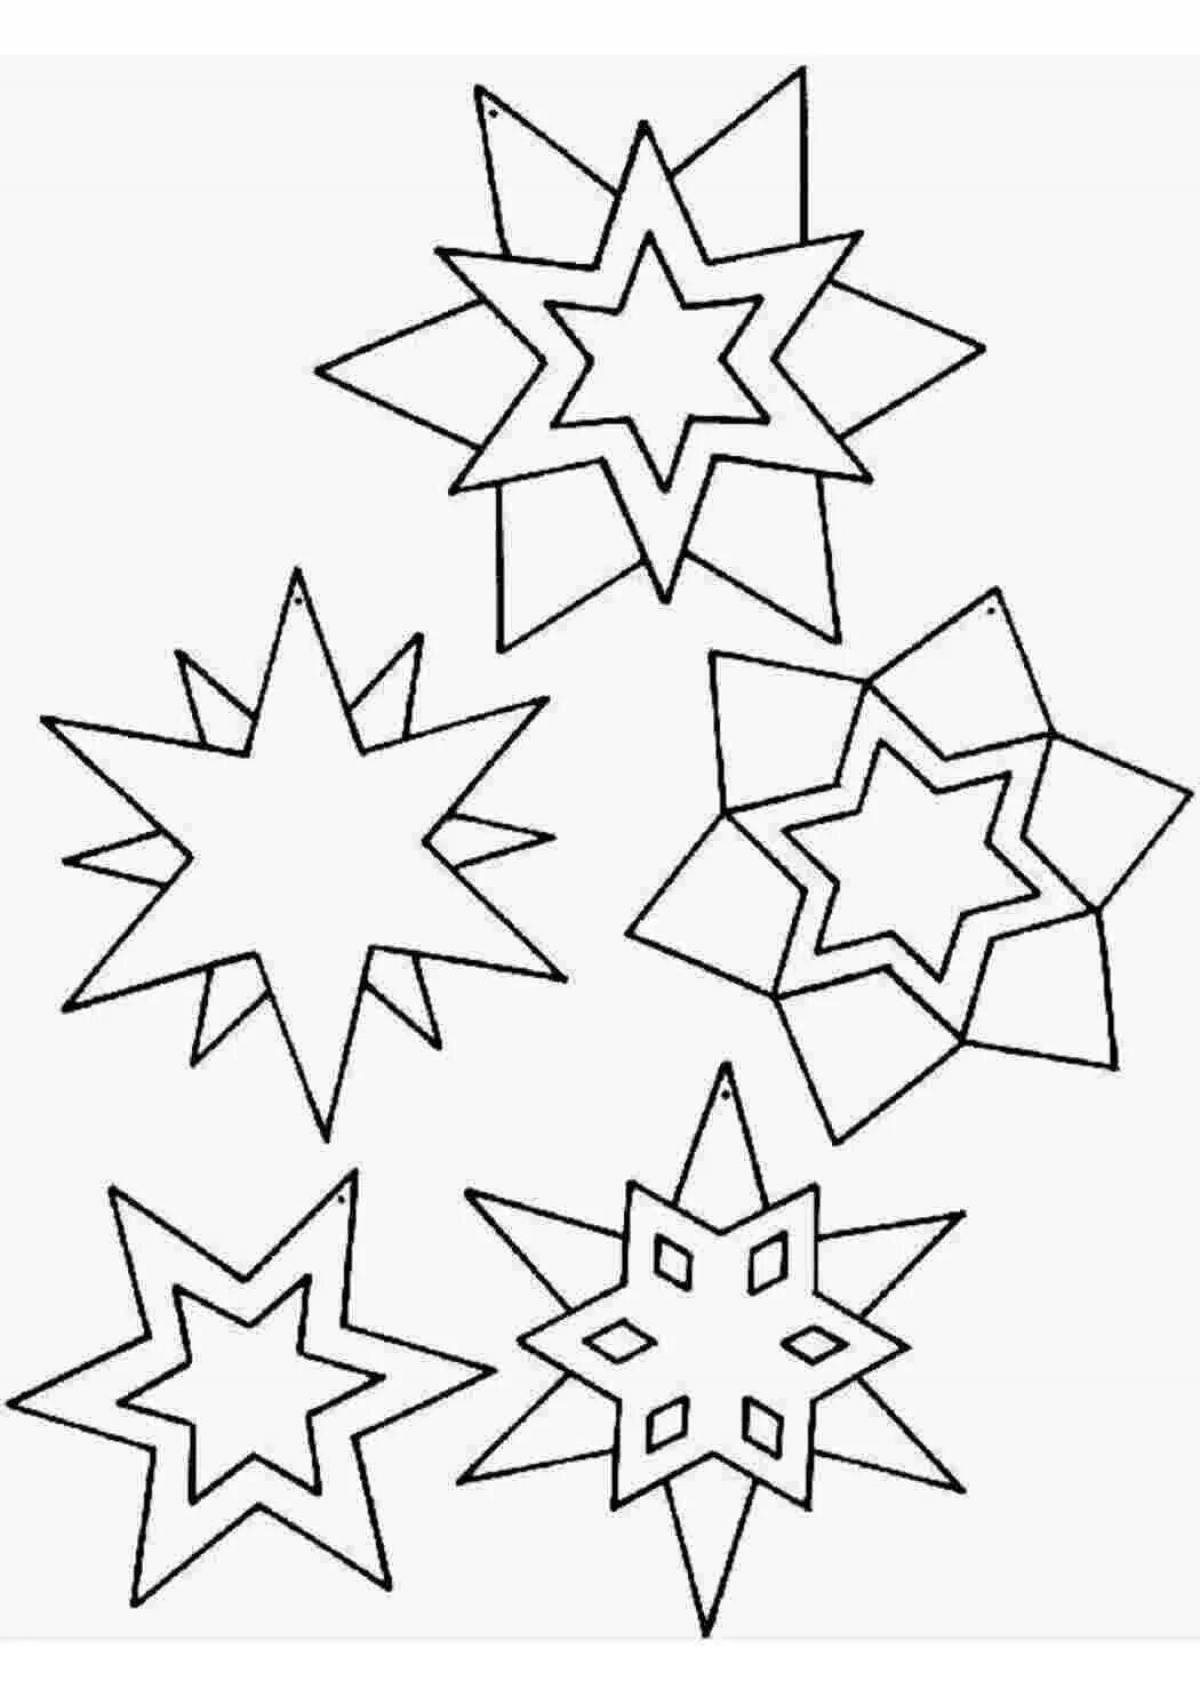 Coloring book shiny little stars